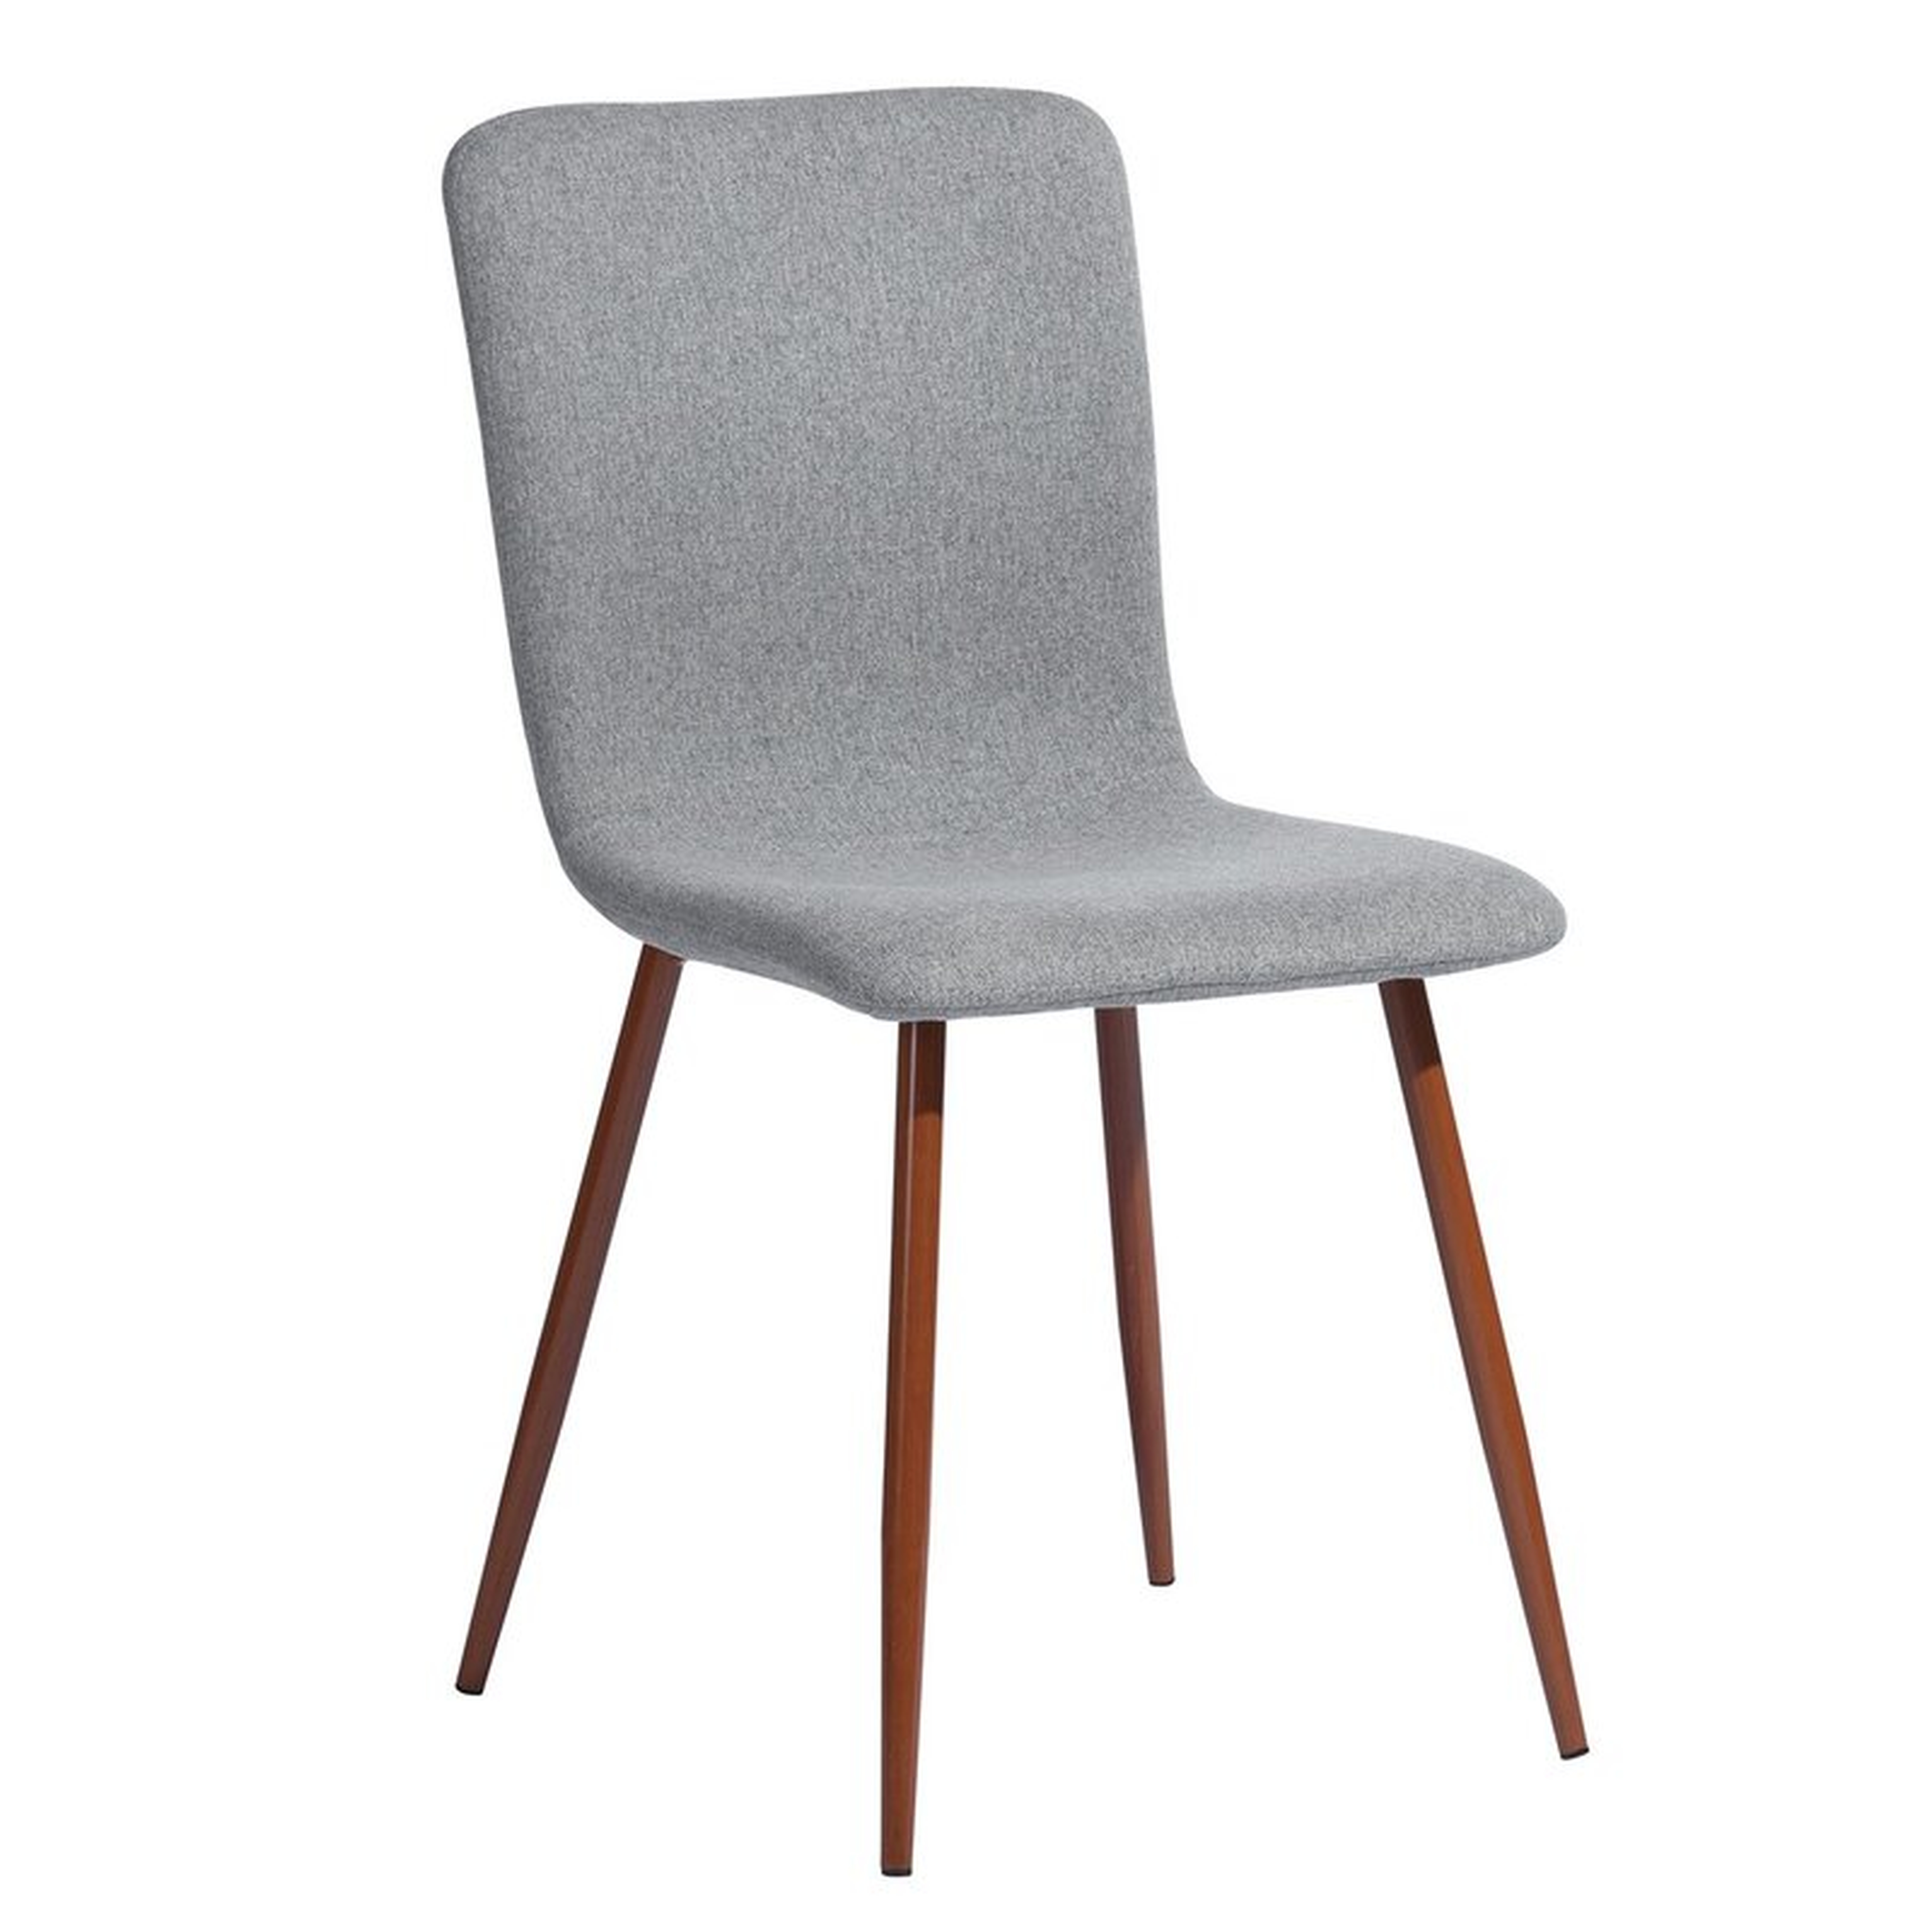 Yarnell Upholstered Dining Chair, Set of 4 - Wayfair